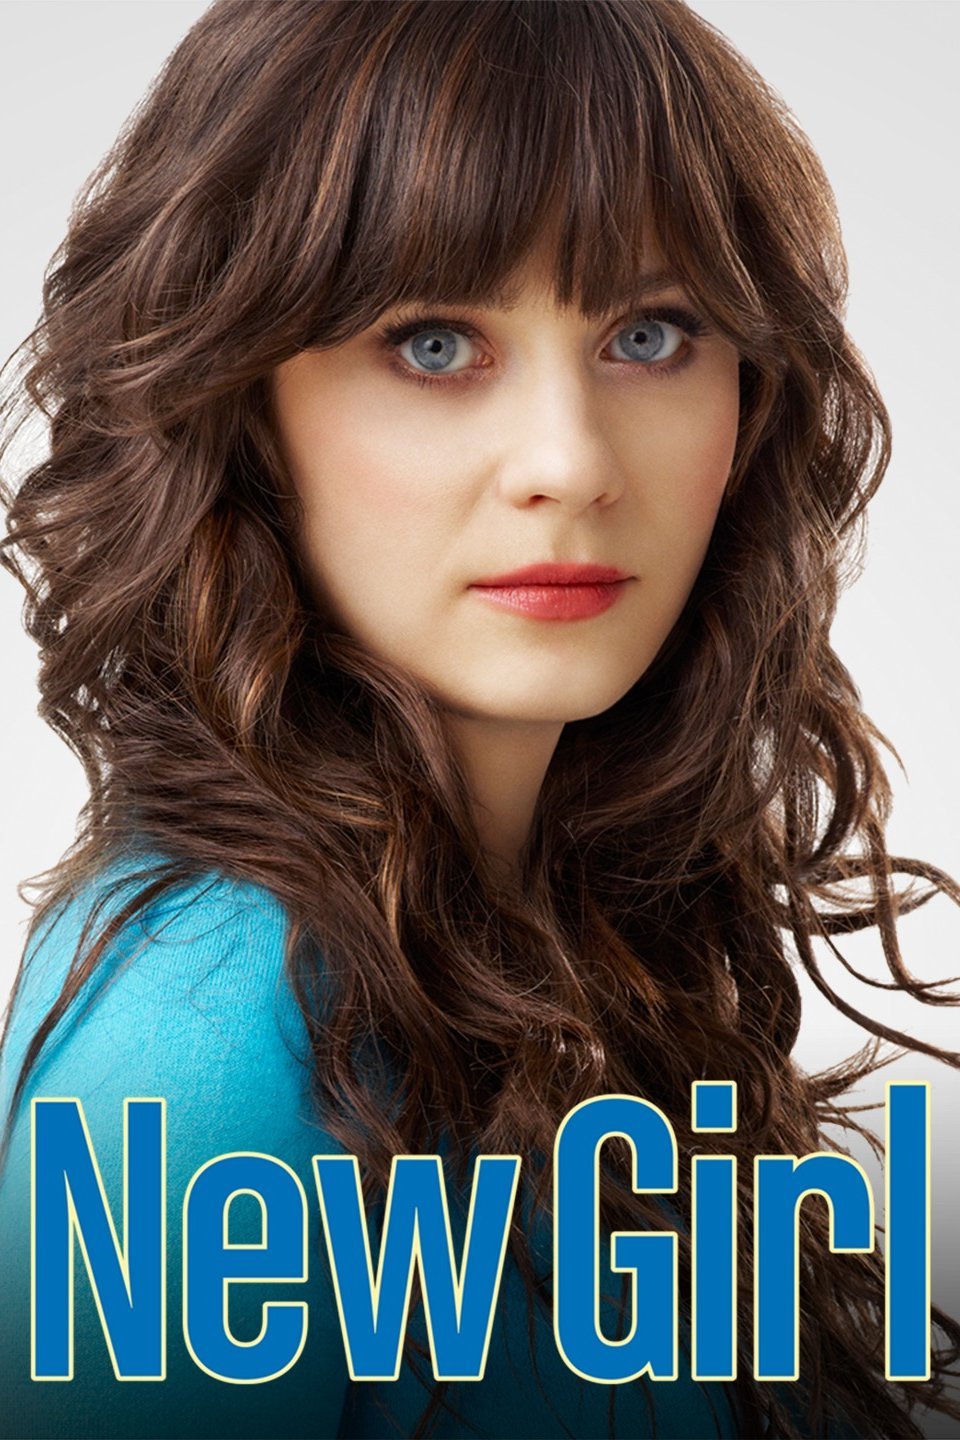 New Girl Rotten Tomatoes